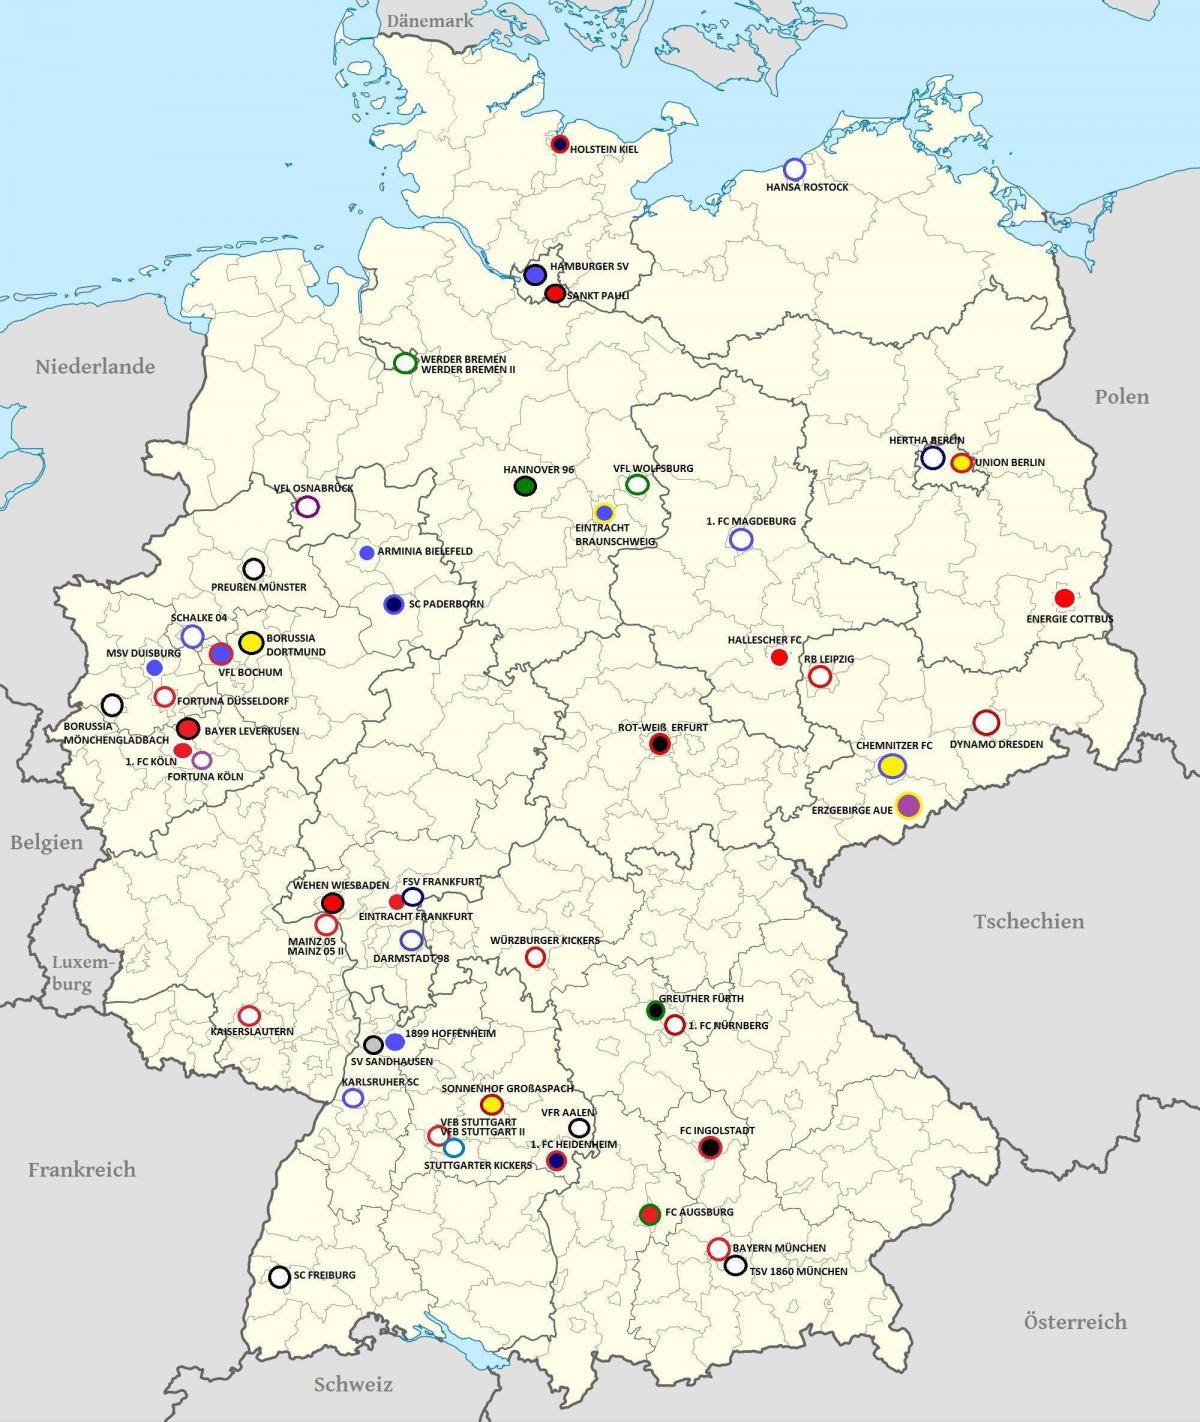 stadiums map of Germany